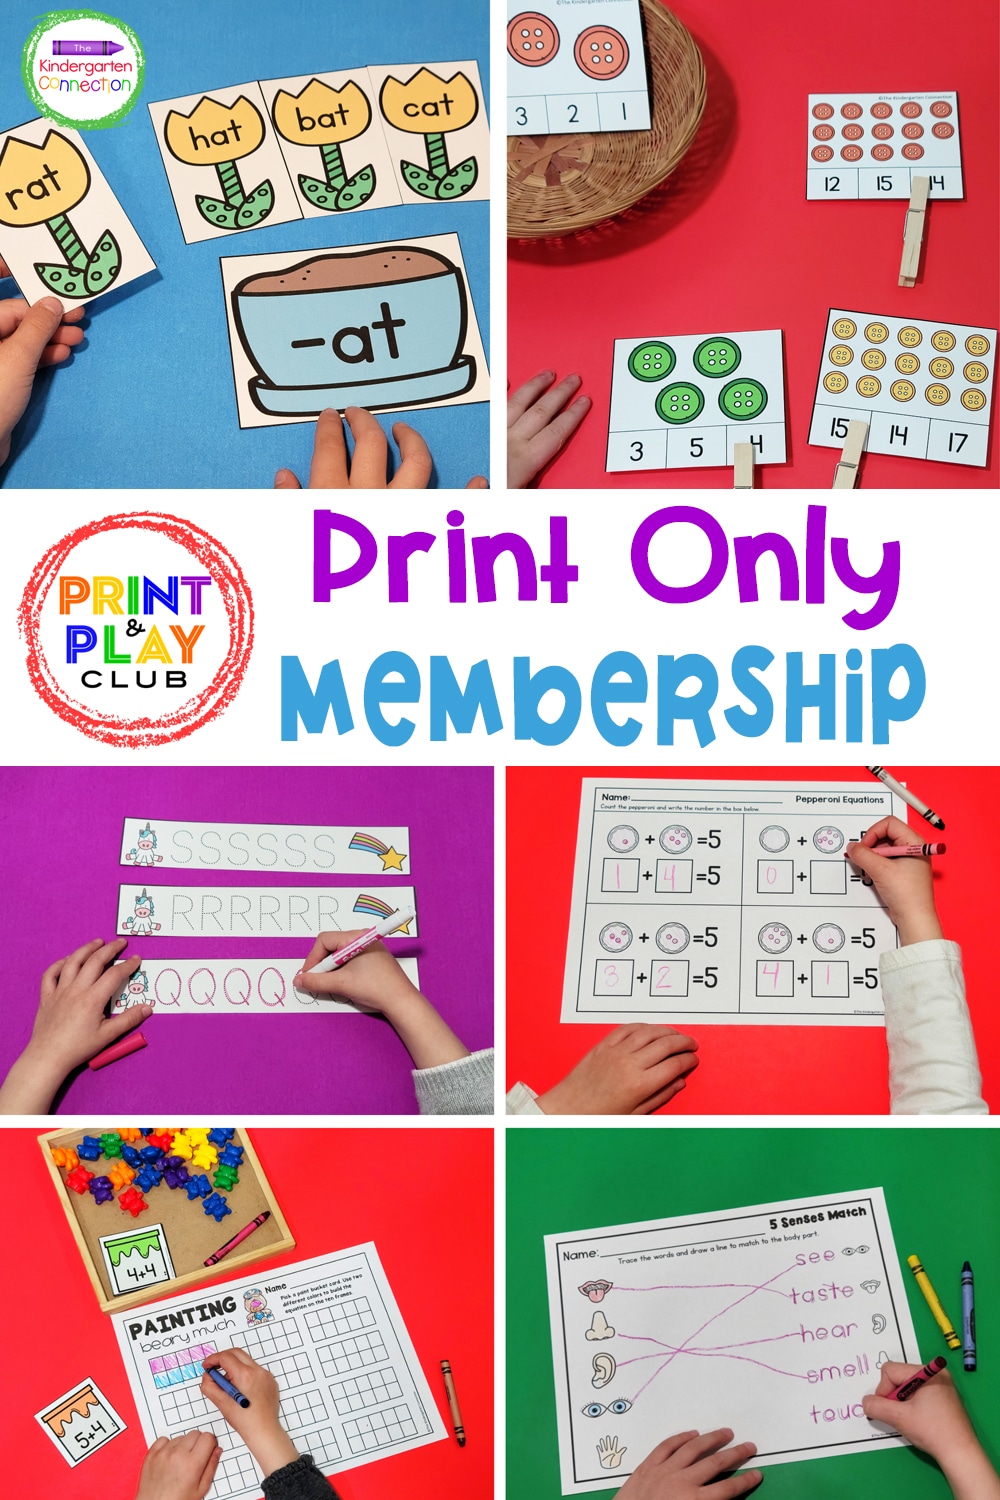 Transform your teaching with ready-to-go resources with the Print and Play Club "Print Only" membership option for Pre-K & Kindergarten teachers!